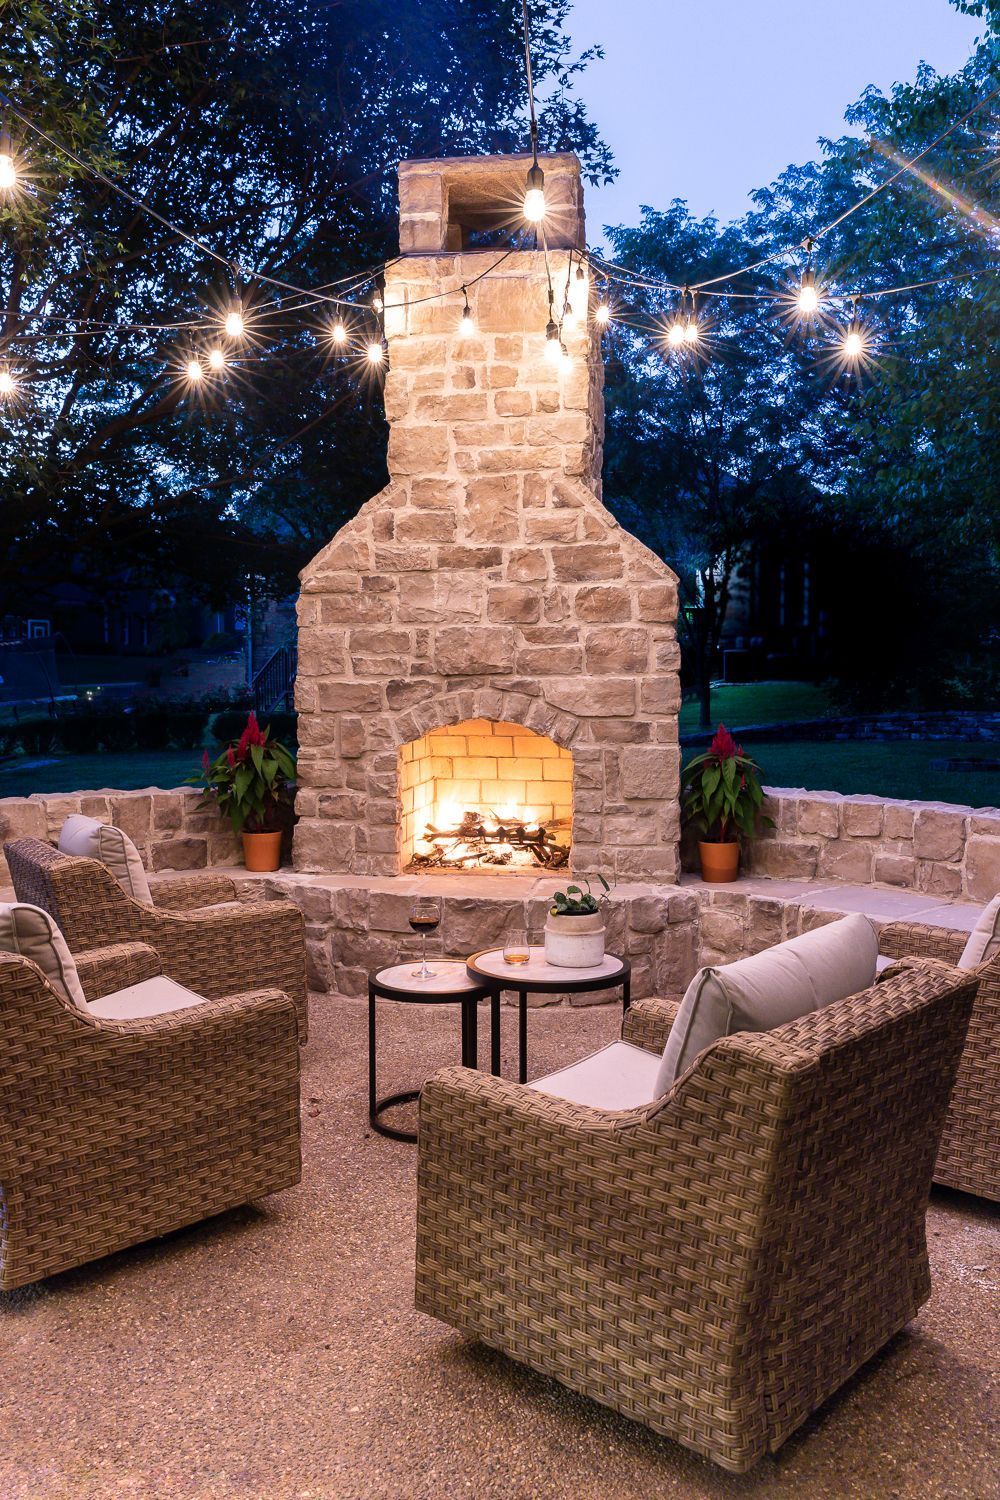 The Appeal of a Cozy Patio Fireplace